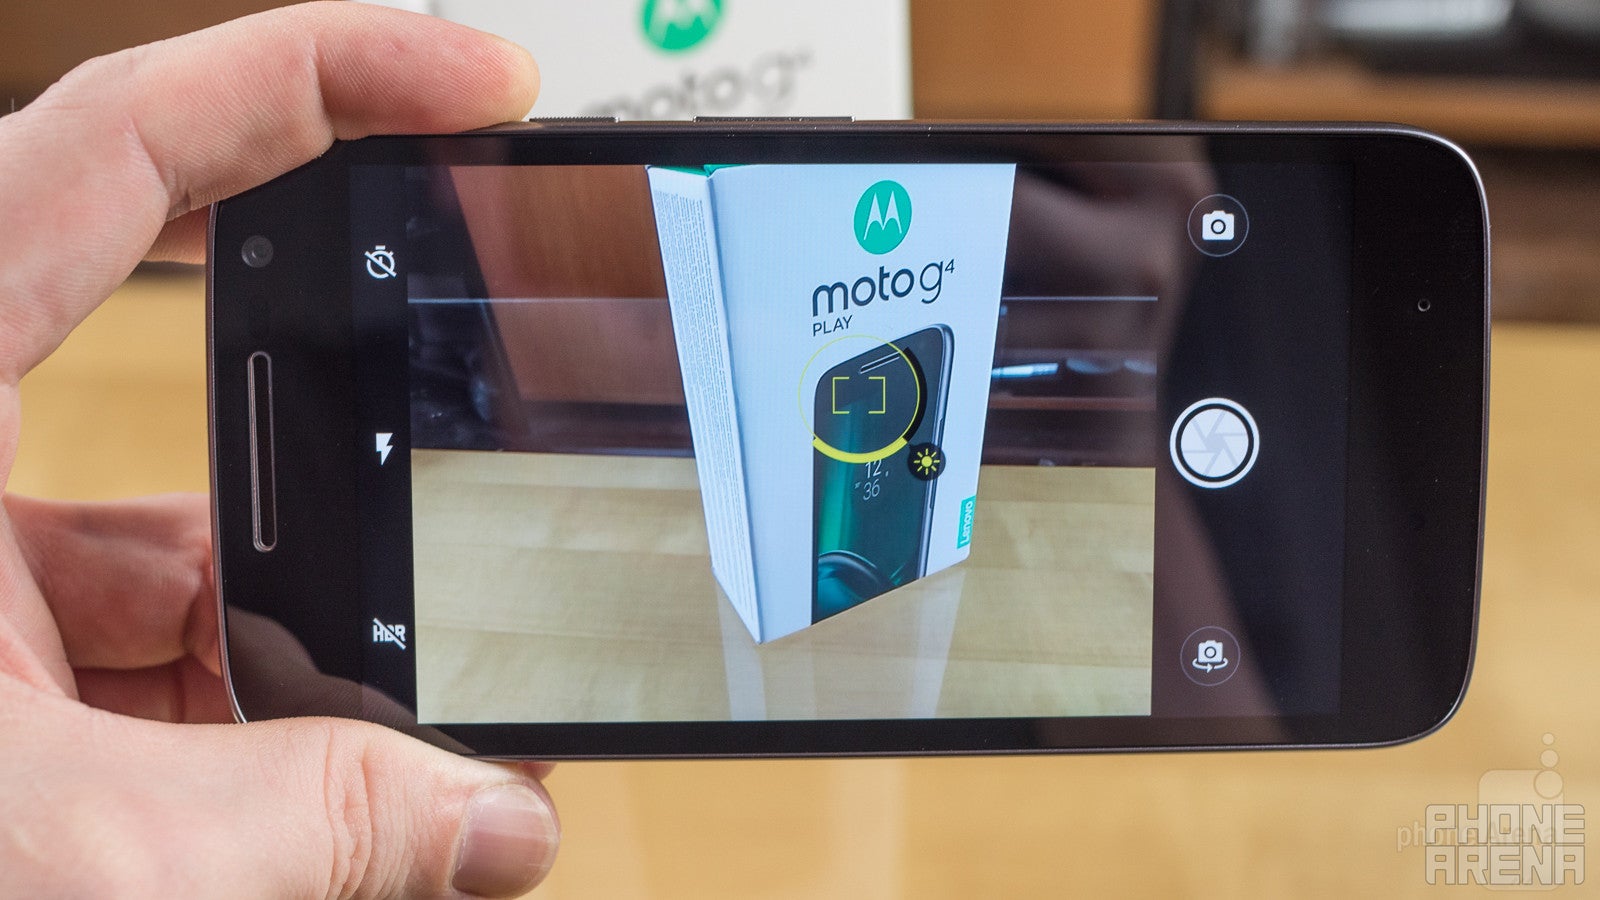 Moto G4 Play Review